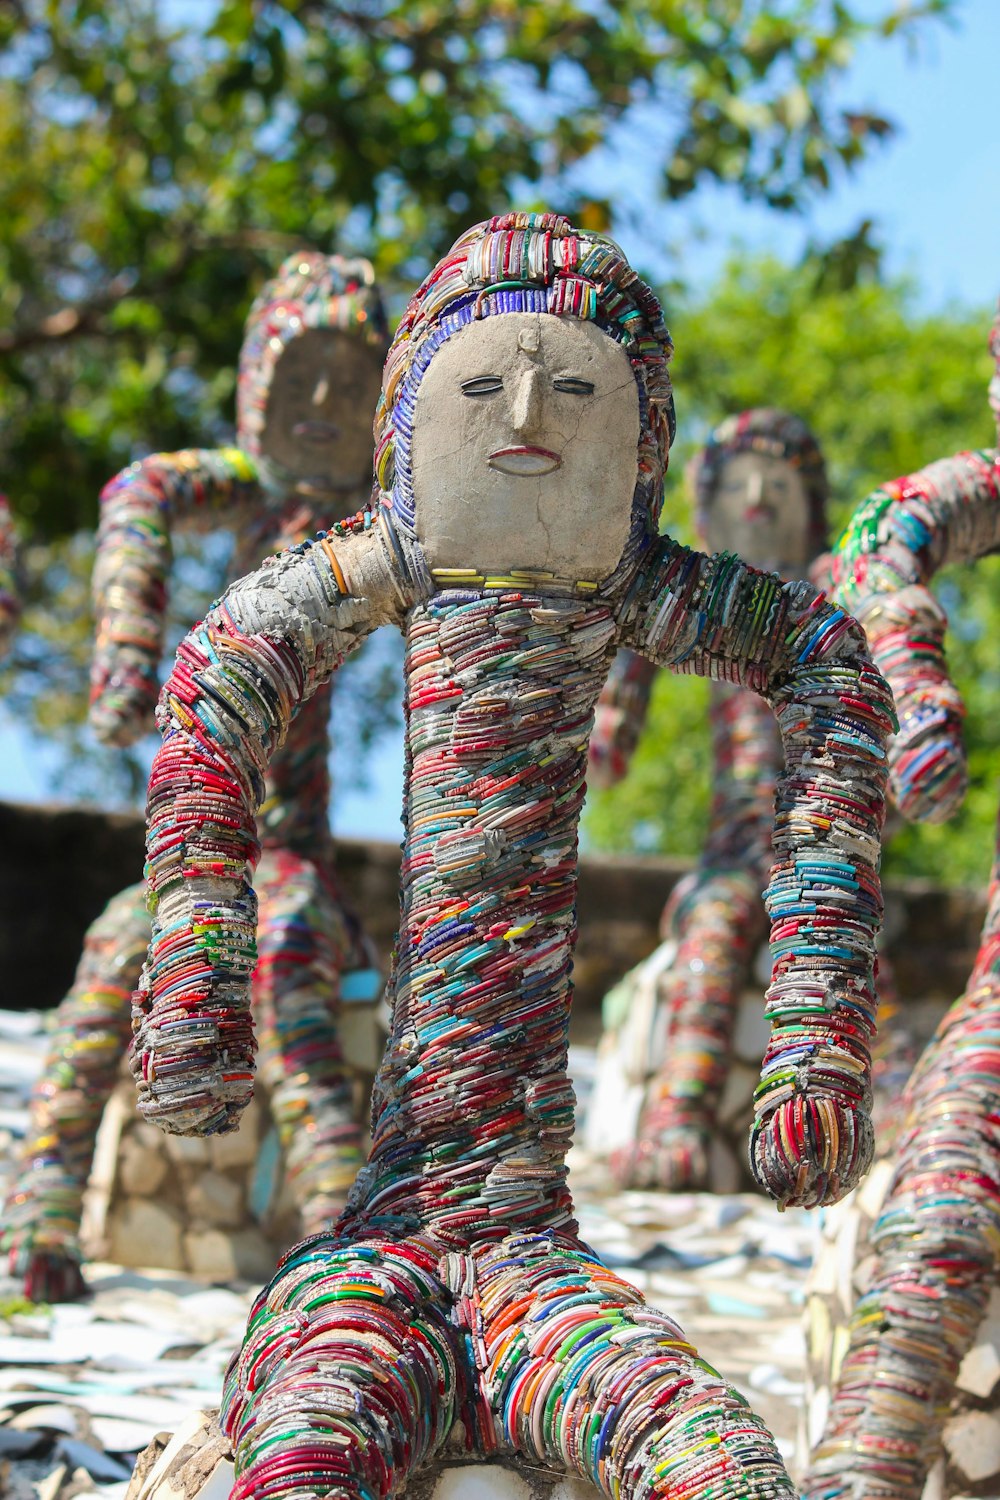 a sculpture of a person made out of yarn